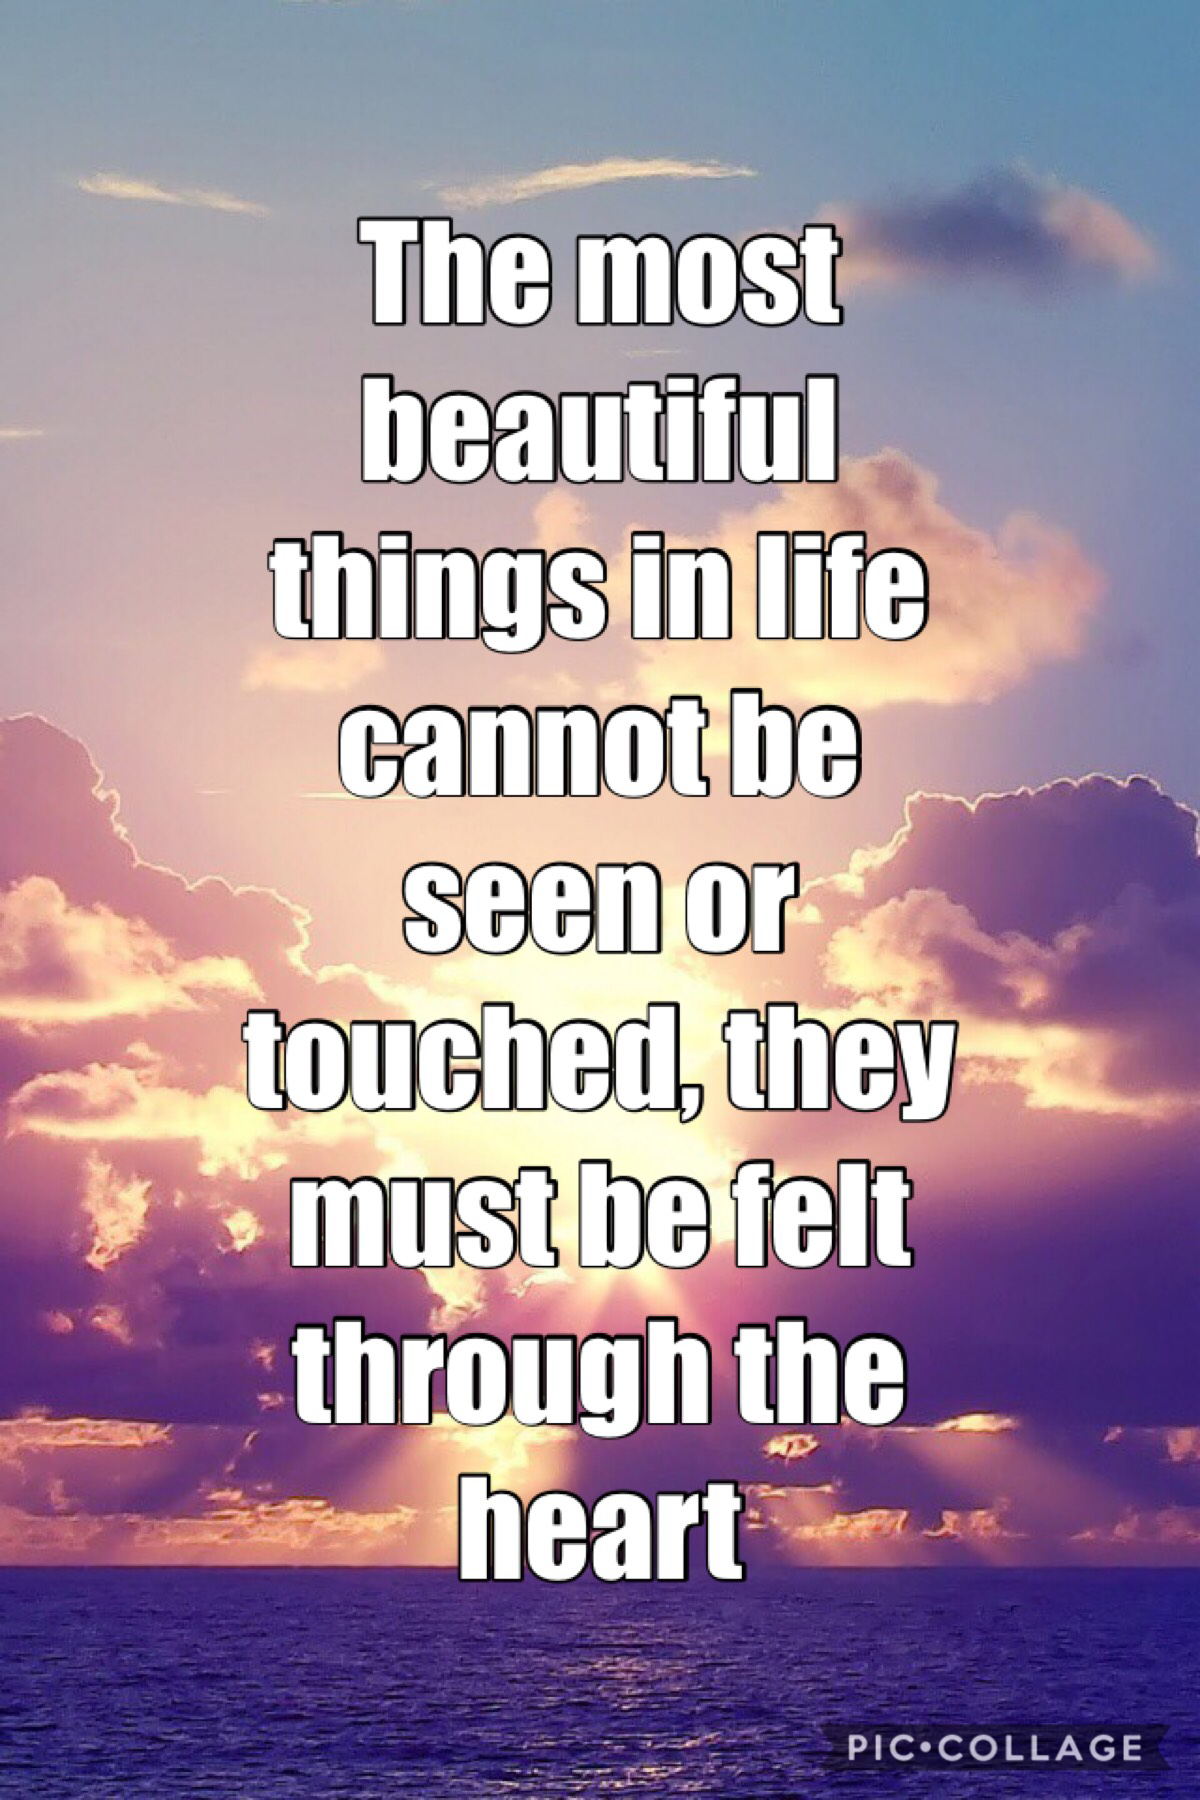 💖Tap for pretty quote💖
The most beautiful things in life cannot be seen or touched, they must be felt through the heart